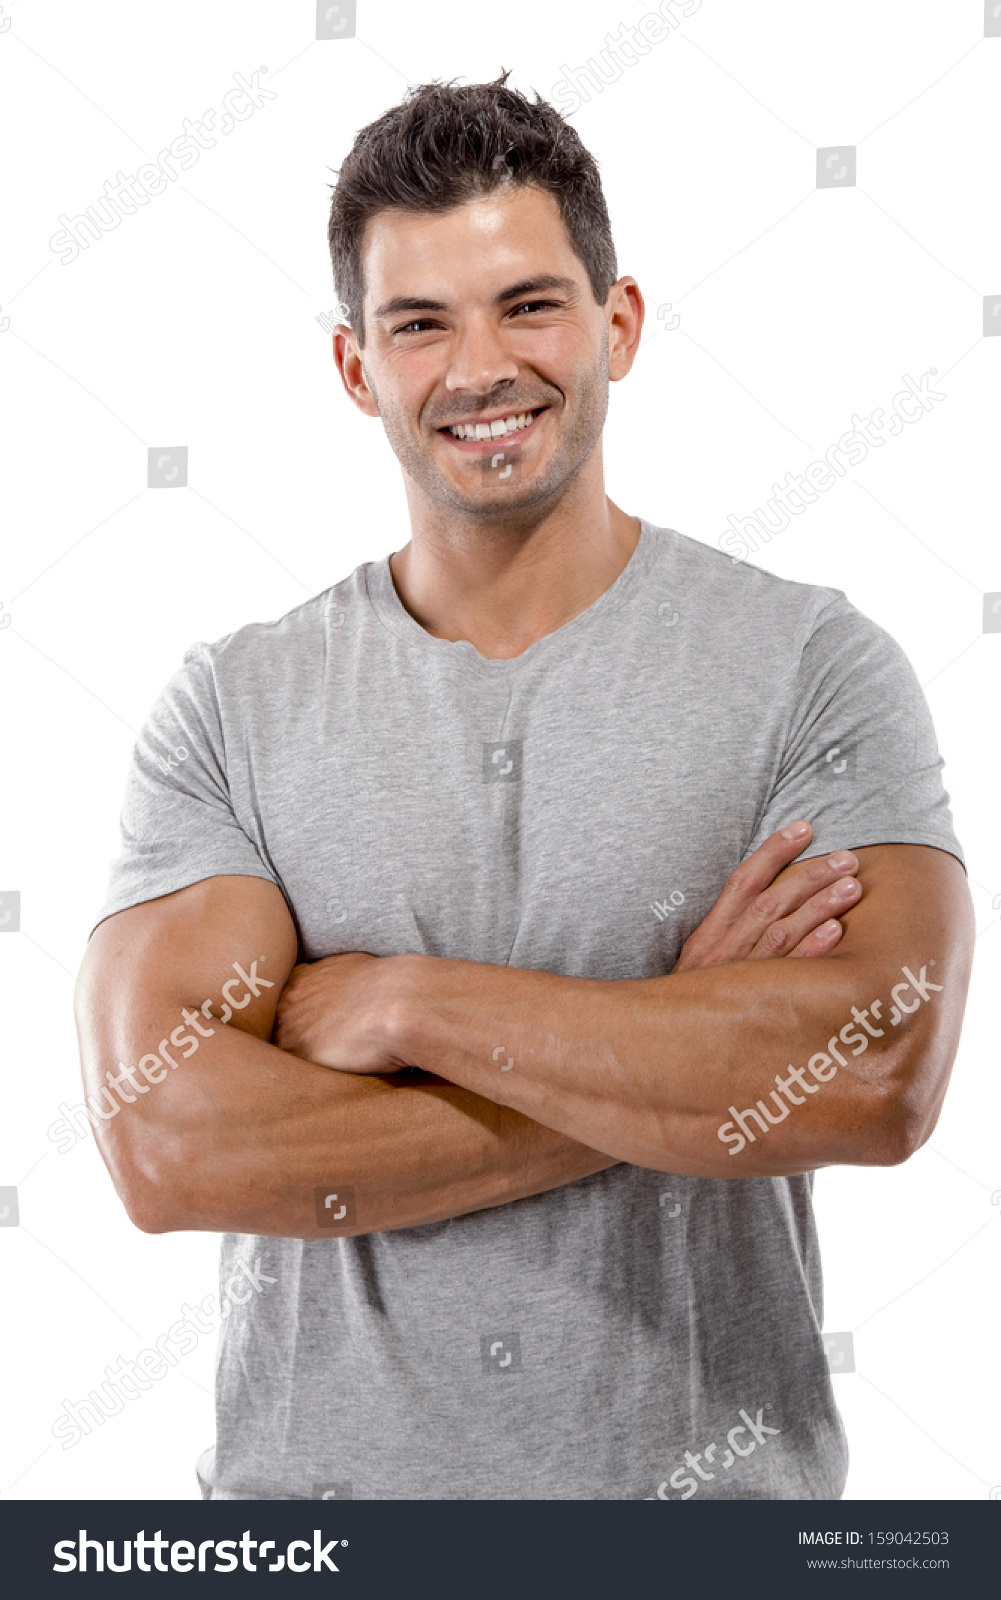 Portrait Of A Handsome Latin Man Smiling With Hands Folded, Isolated ...